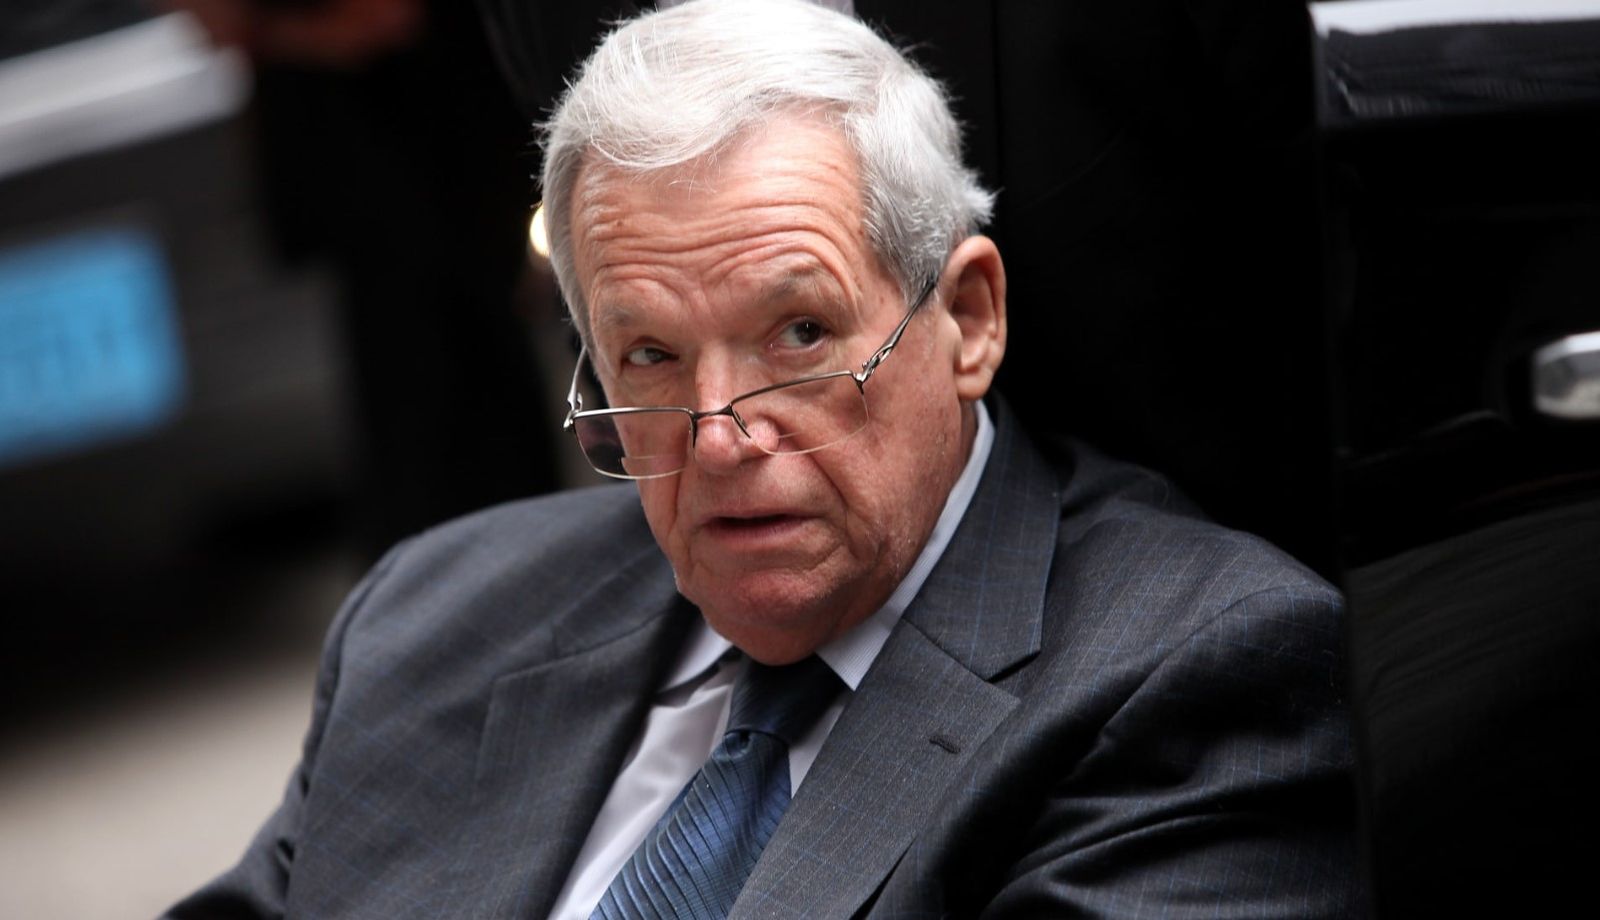 Ex-House Speaker, Dennis Hastert, settles child sexual abuse payments suit